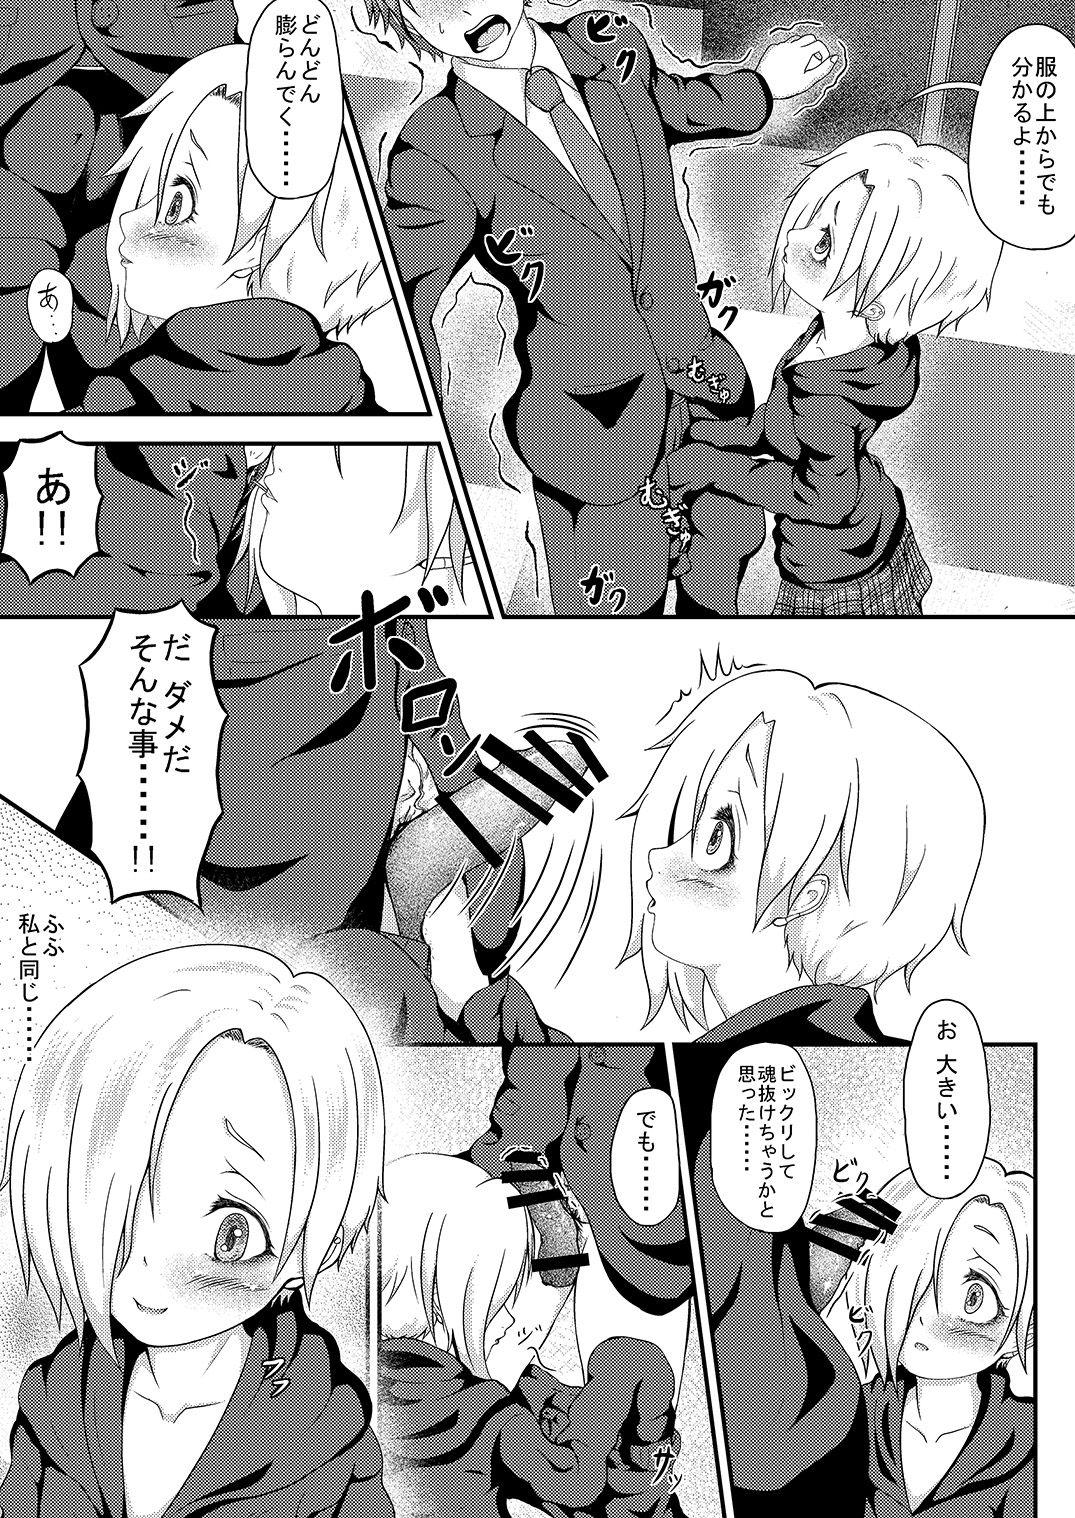 Erotica The H-aunting of Koume-chan - The idolmaster Maid - Page 7